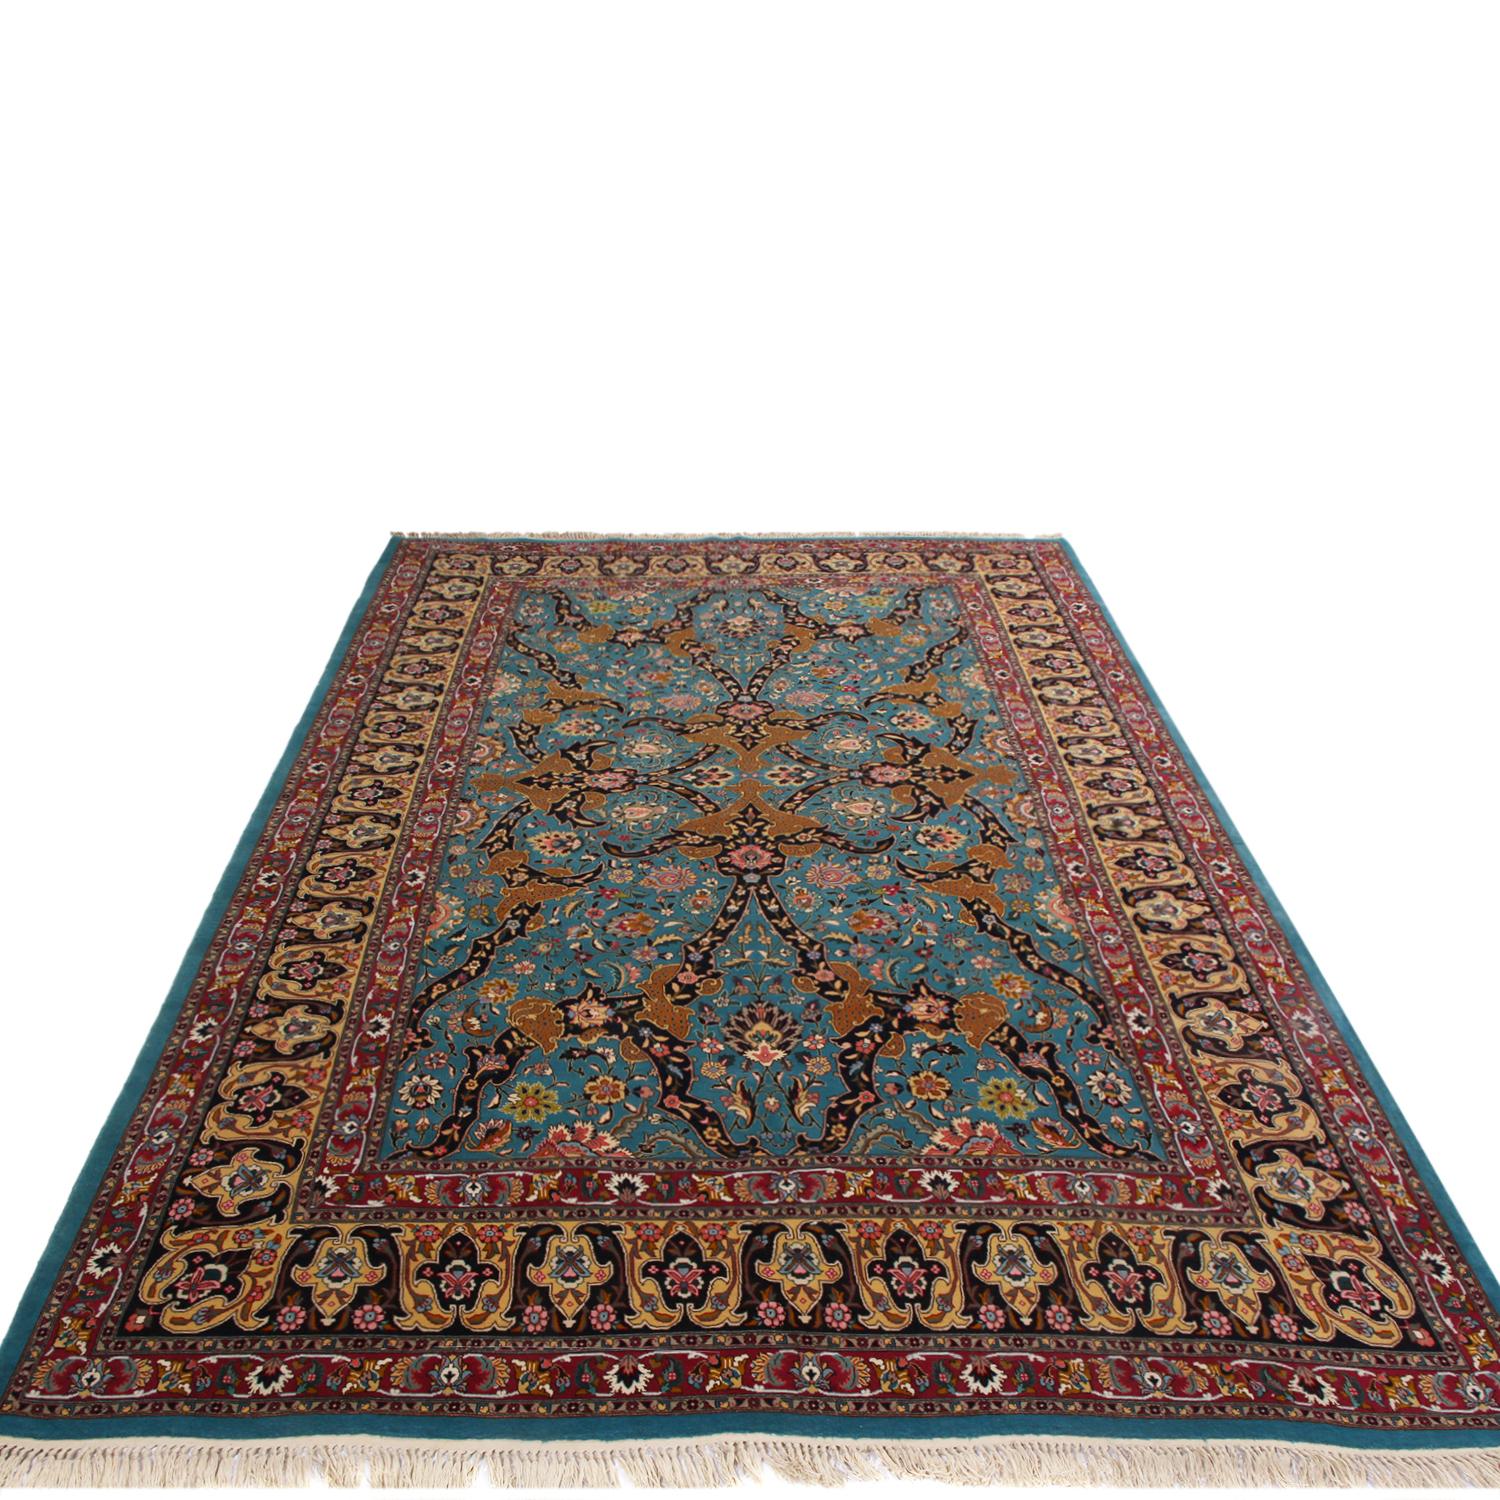 Hand knotted in high-quality wool originating from Persia between 1930-1940, this vintage Tabriz Persian rug hails from one of the most acclaimed carpet-making cities of the region, boasting a sharpness of detail in the mirrored borders and field